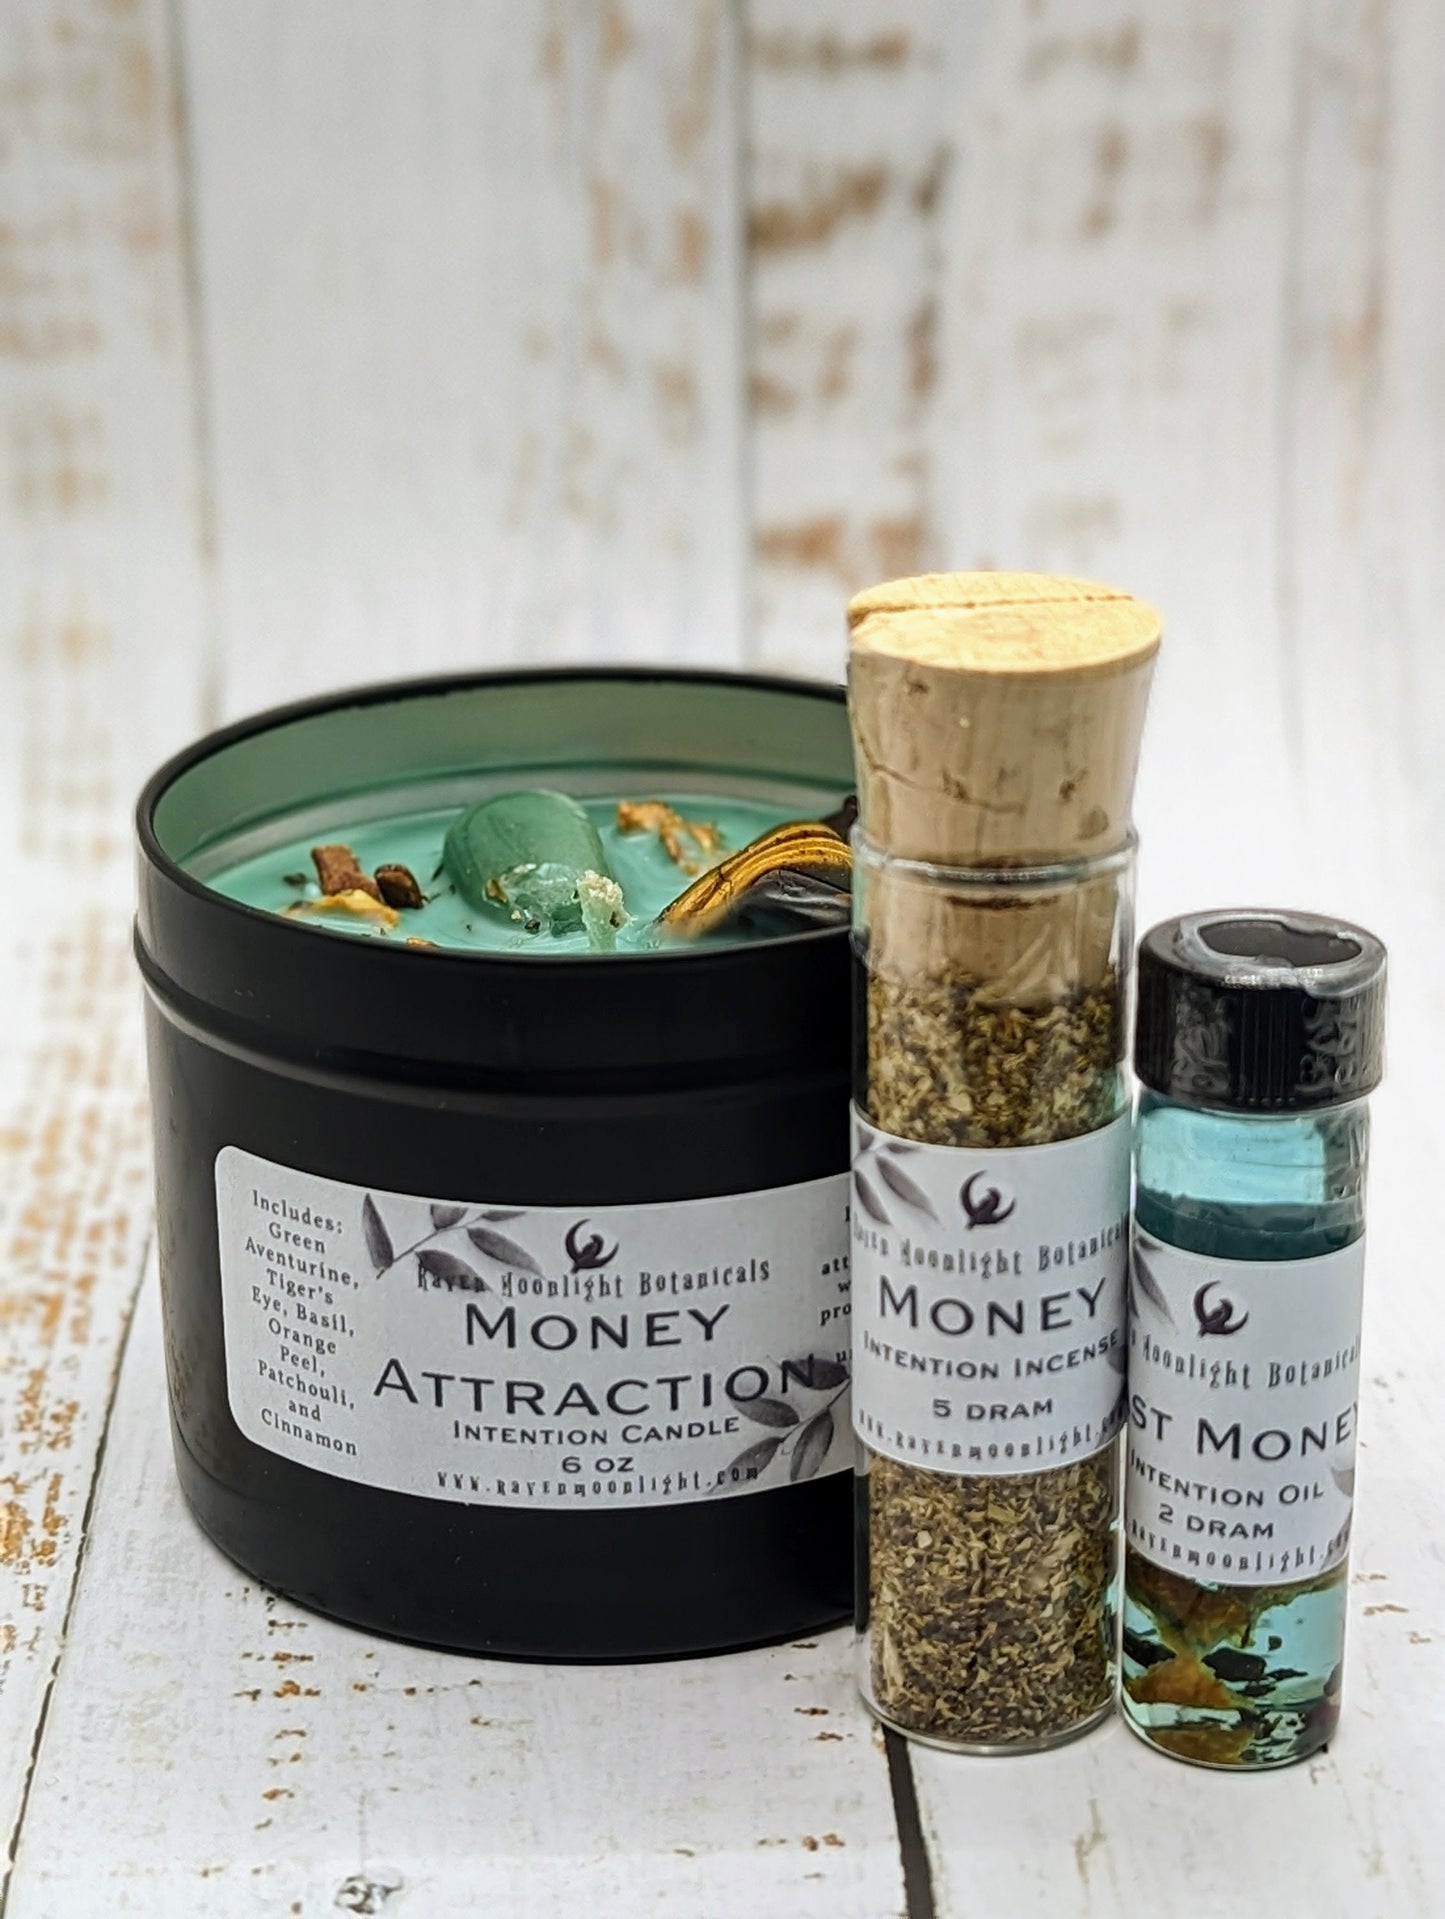 Money Attraction Kit with soy candle, mony incense, and fast money oil